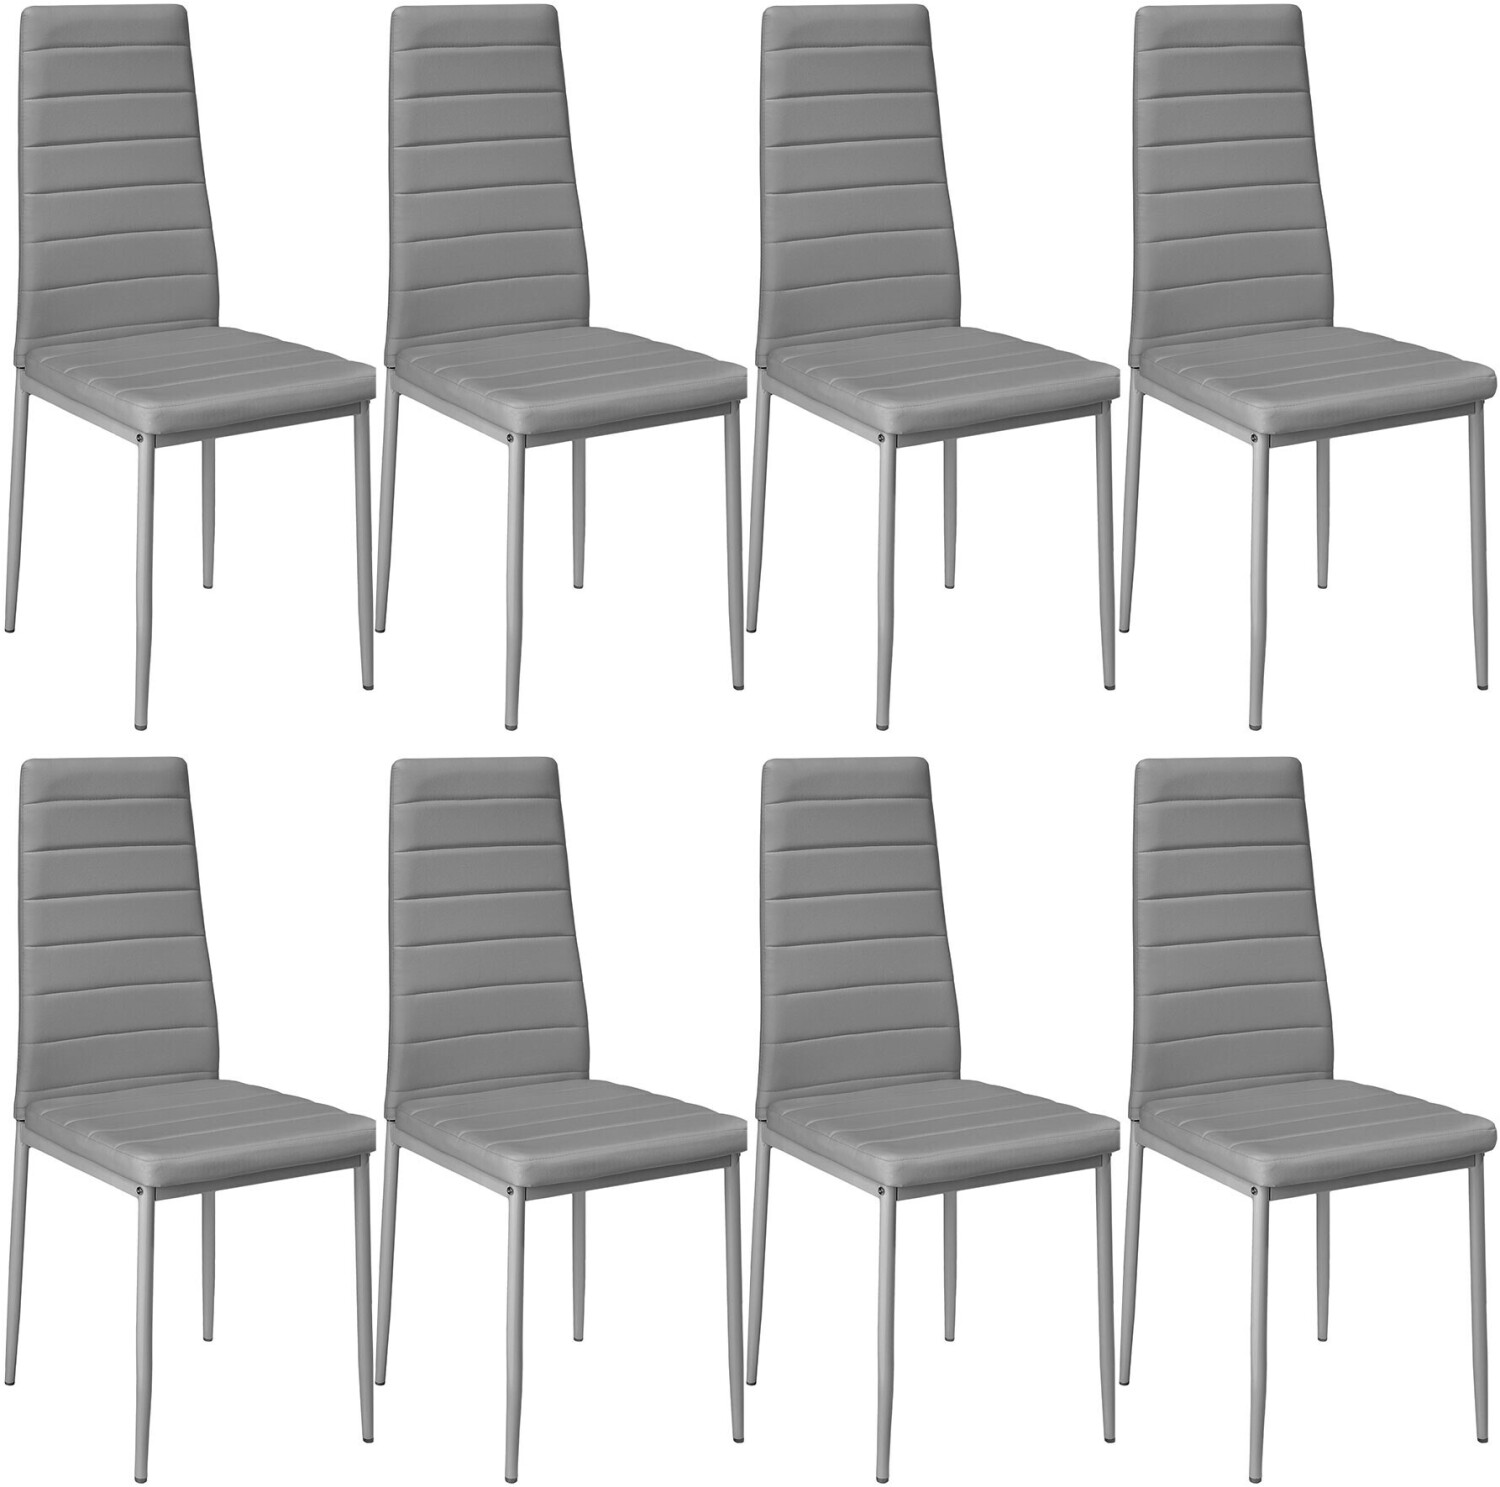 Photos - Dining Table Tectake 8 dining chairs faux leather gray 41x45x98.50cm 